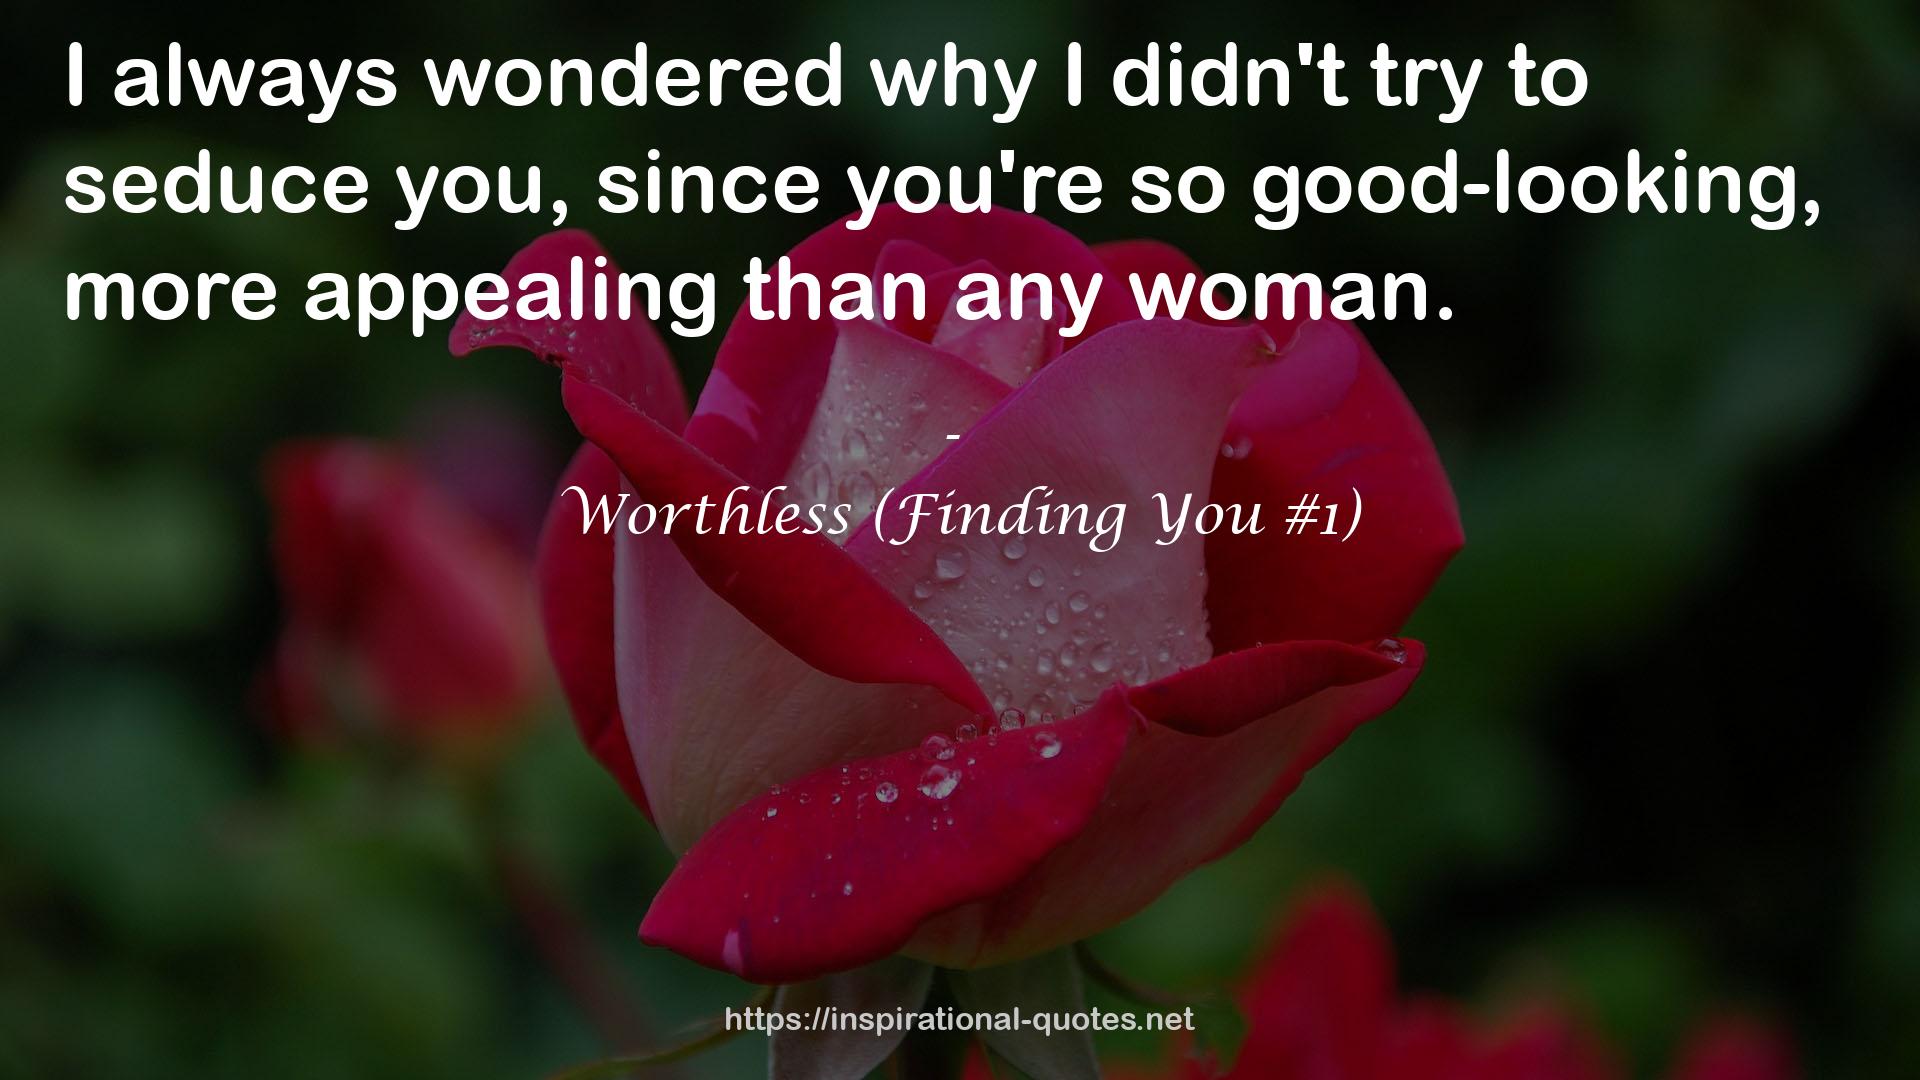 Worthless (Finding You #1) QUOTES